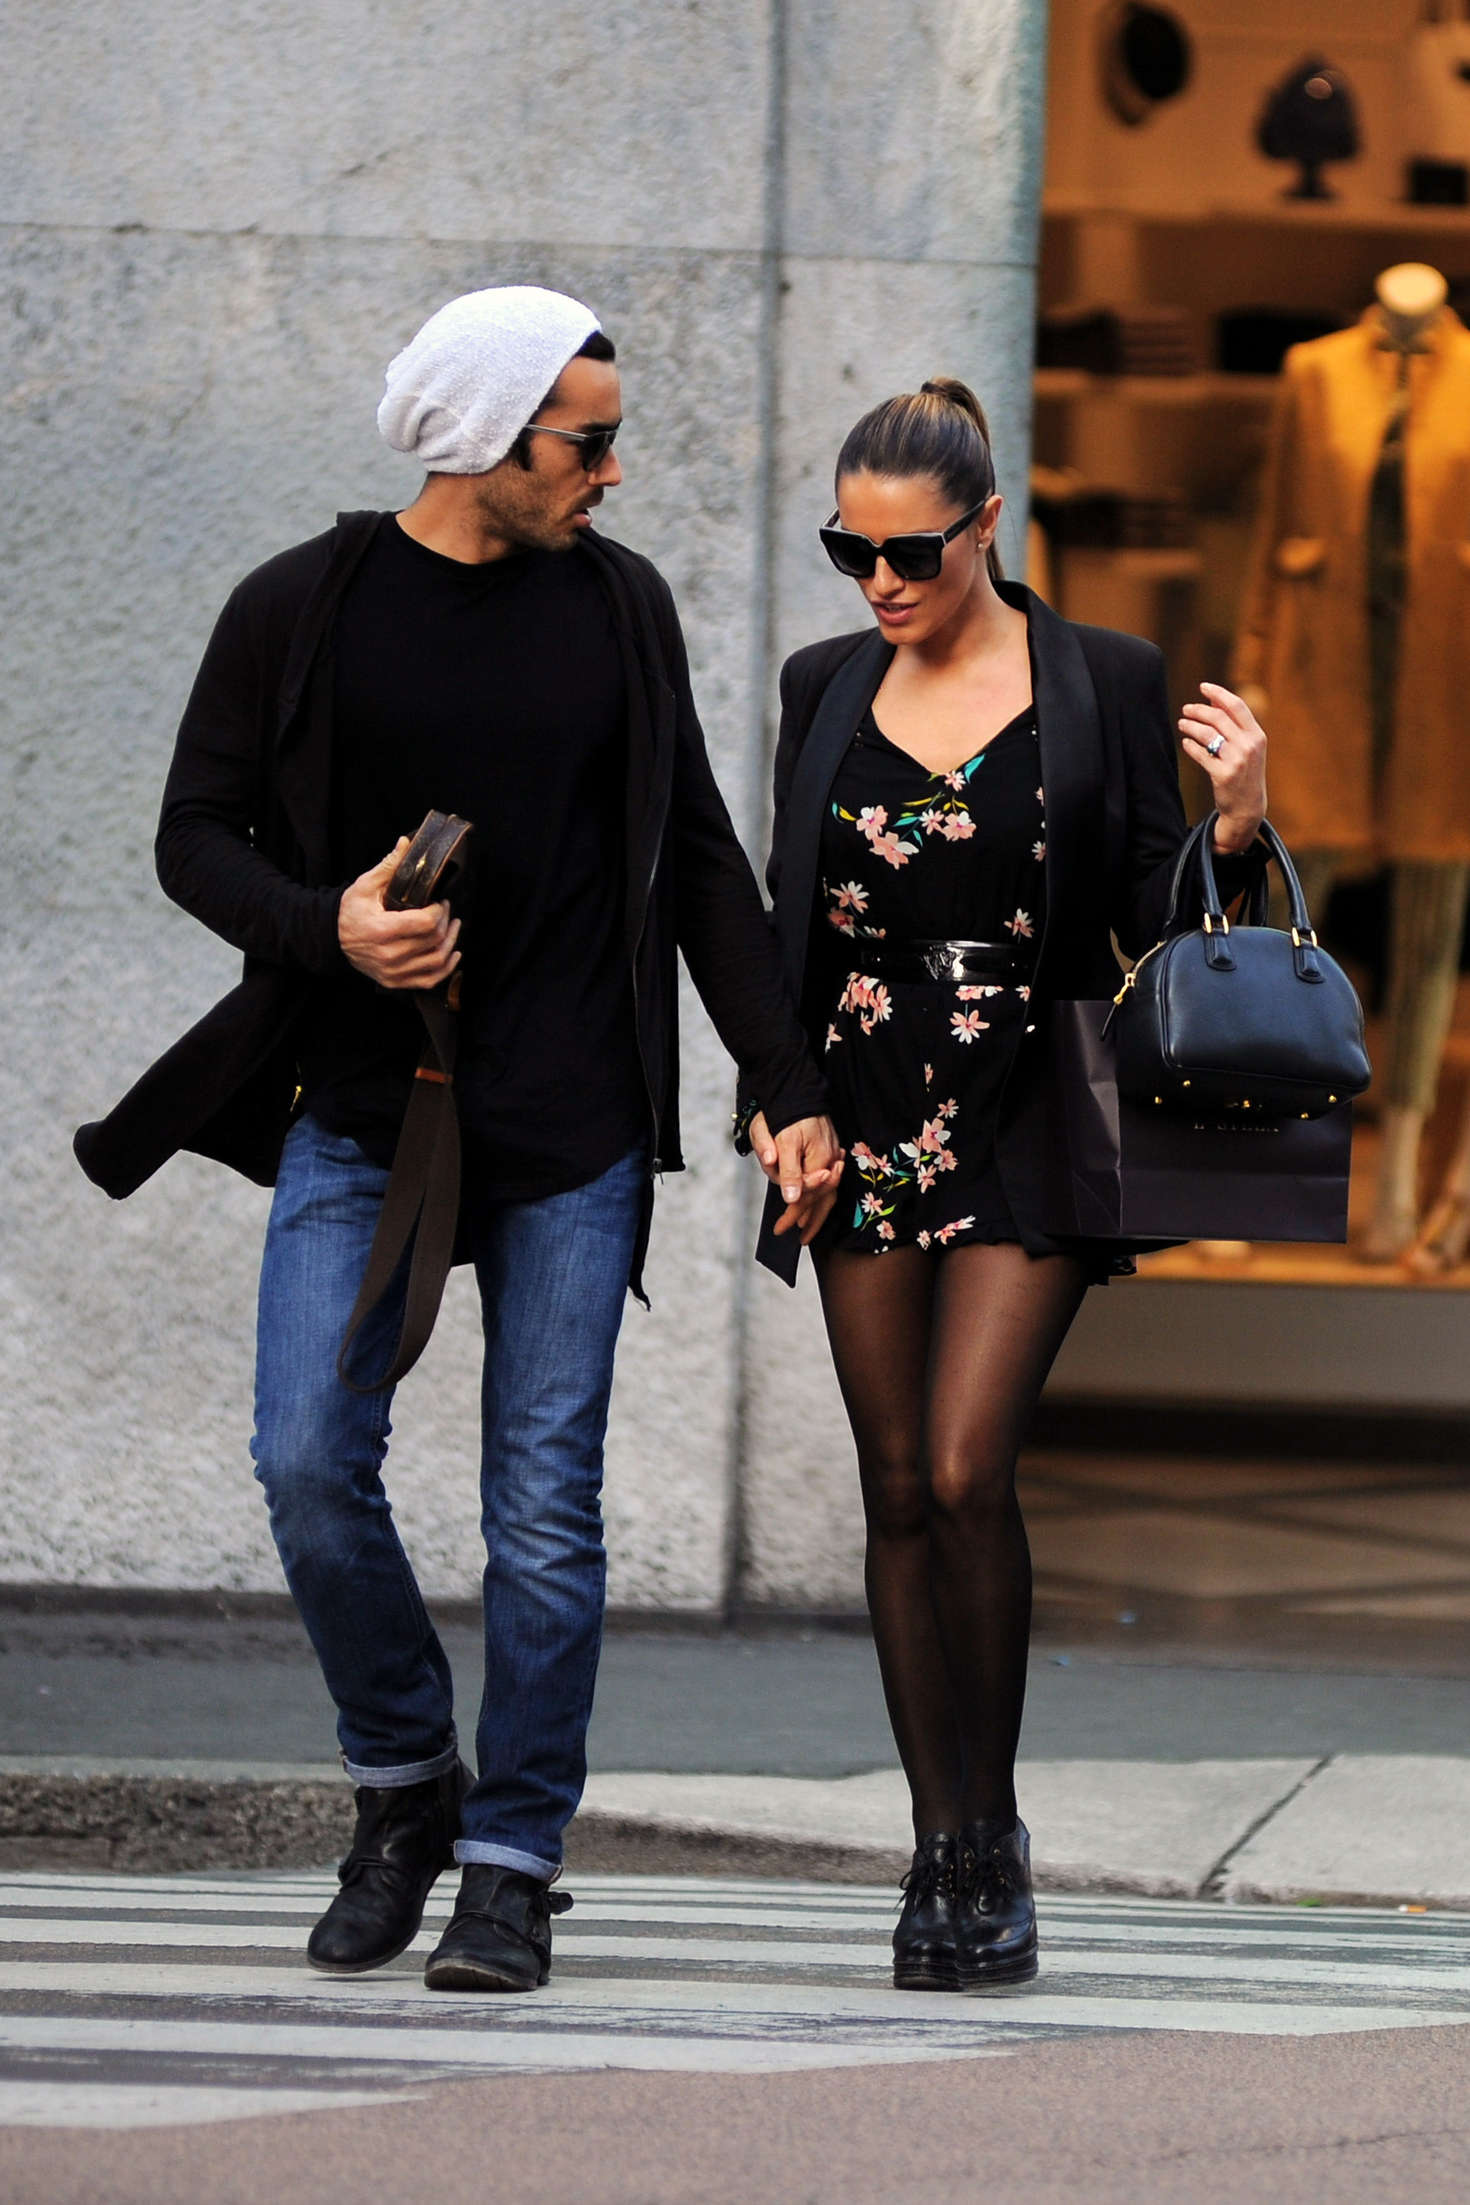 Lola Ponce with her boyfriend Aaron Diaz in Milan